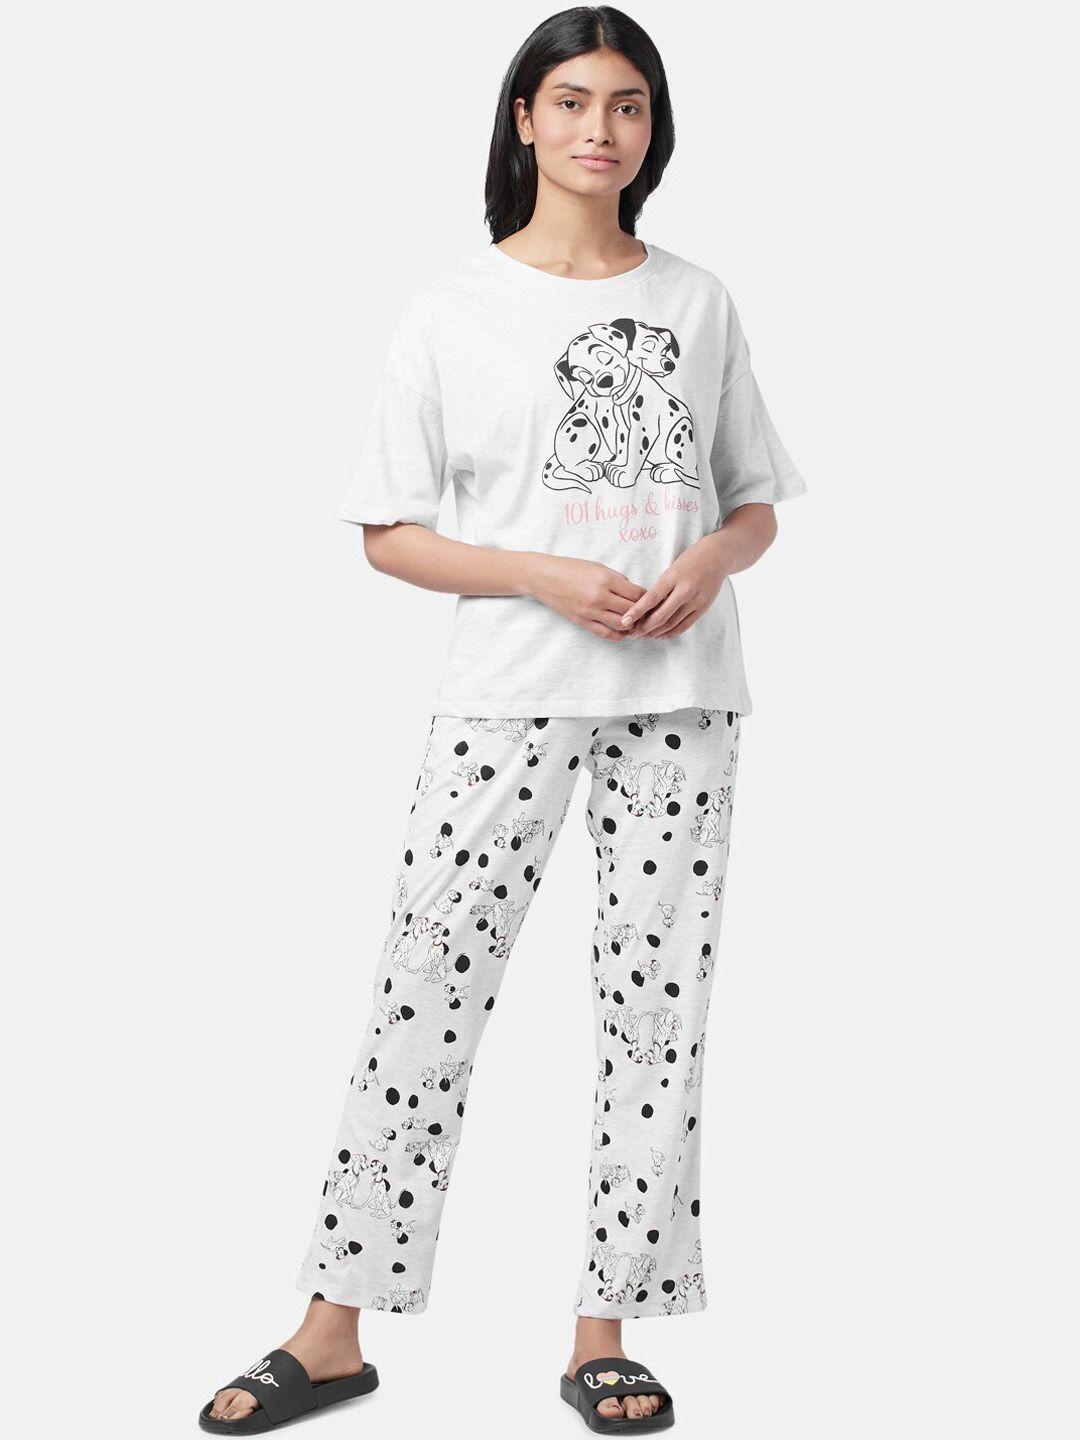 dreamz-by-pantaloons-graphic-printed-pure-cotton-night-suit